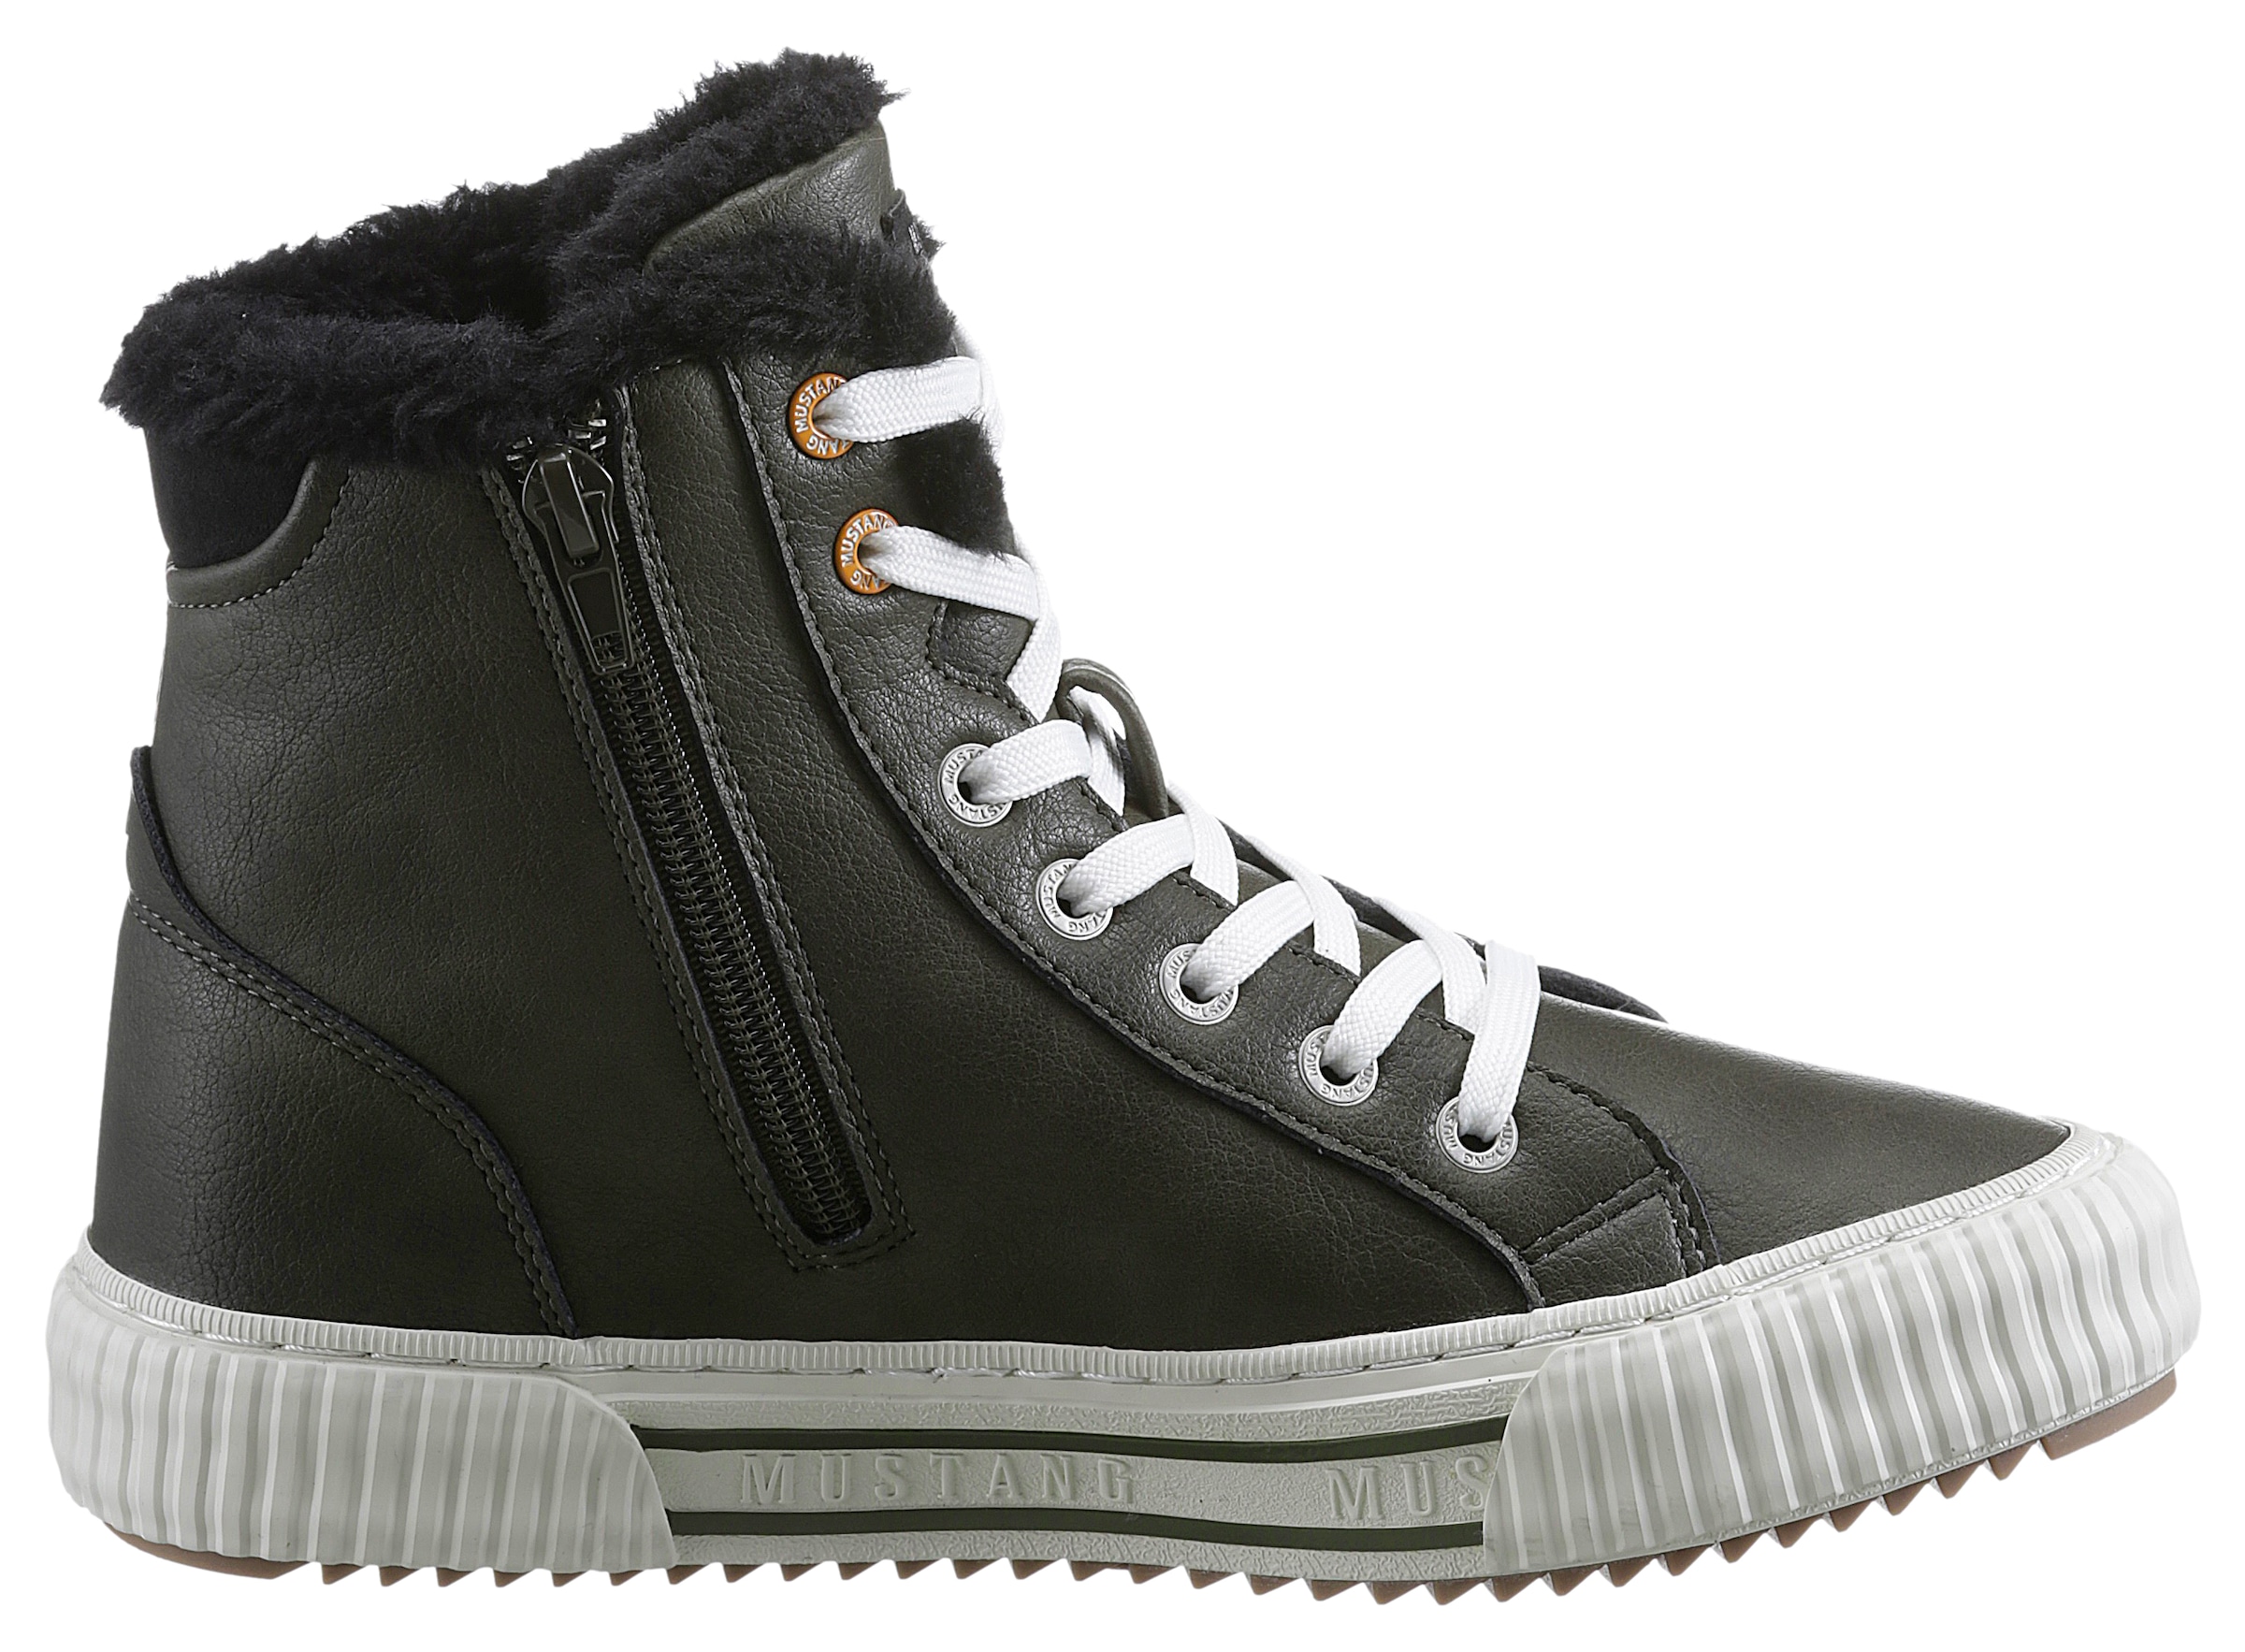 Mustang Shoes Winterboots, mit Plateausohle